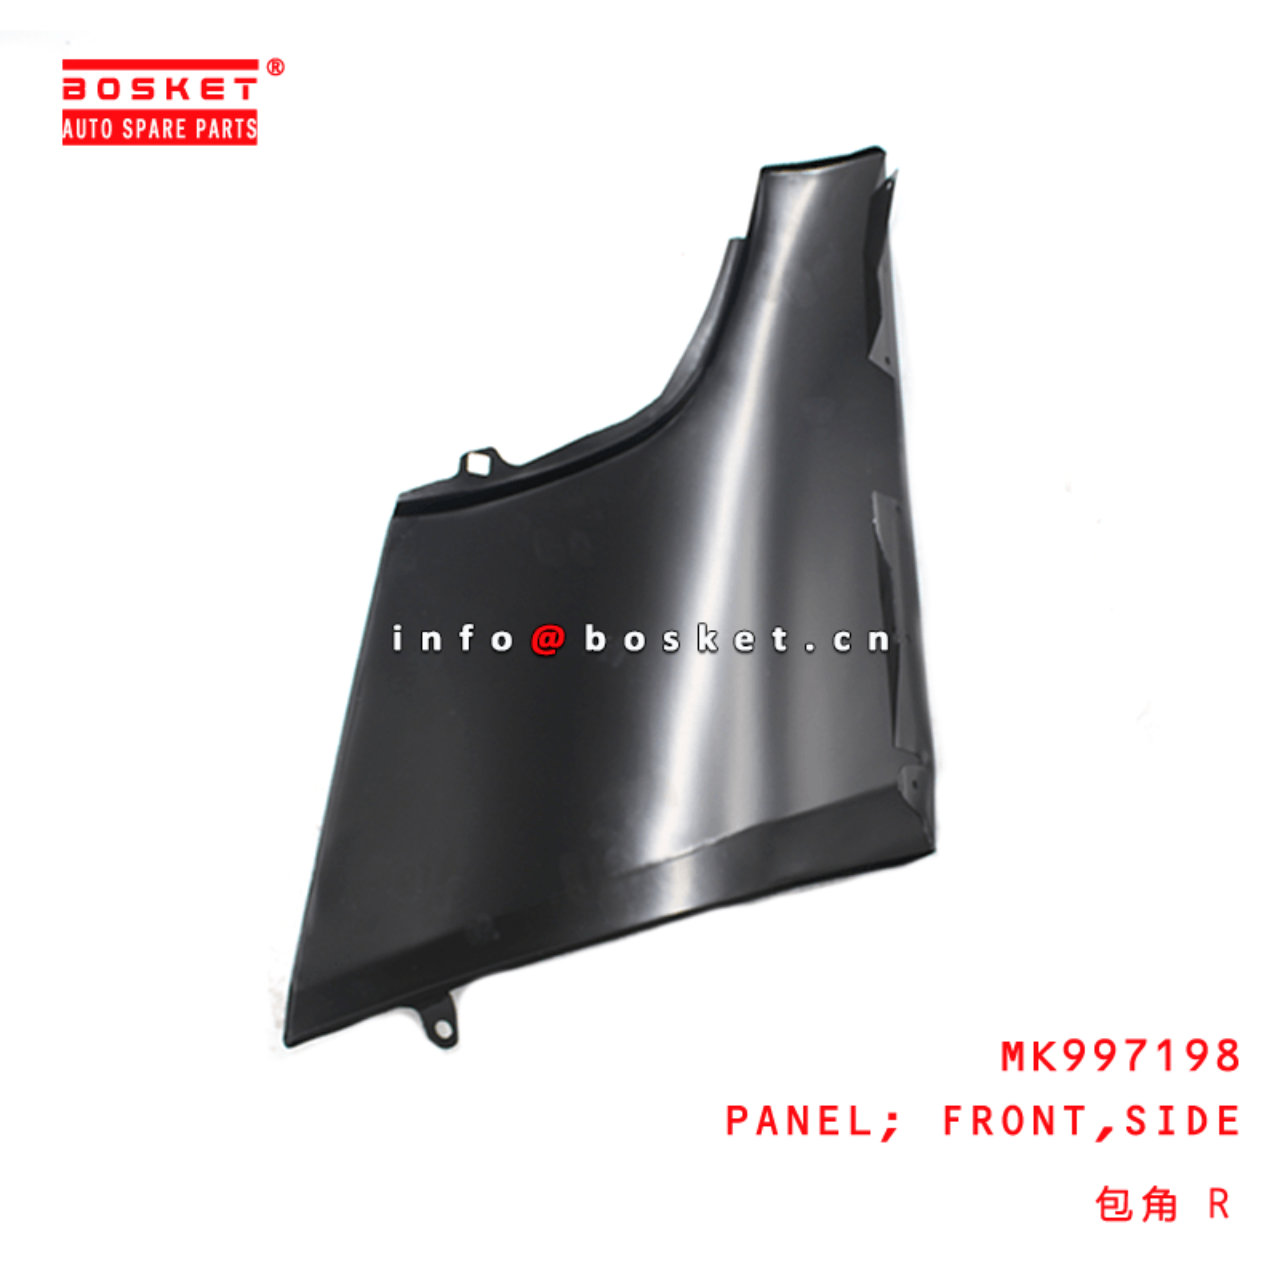  MK997198 Side Front Panel RH Suitable For MITSUBISHI FUSO CANTER RUS